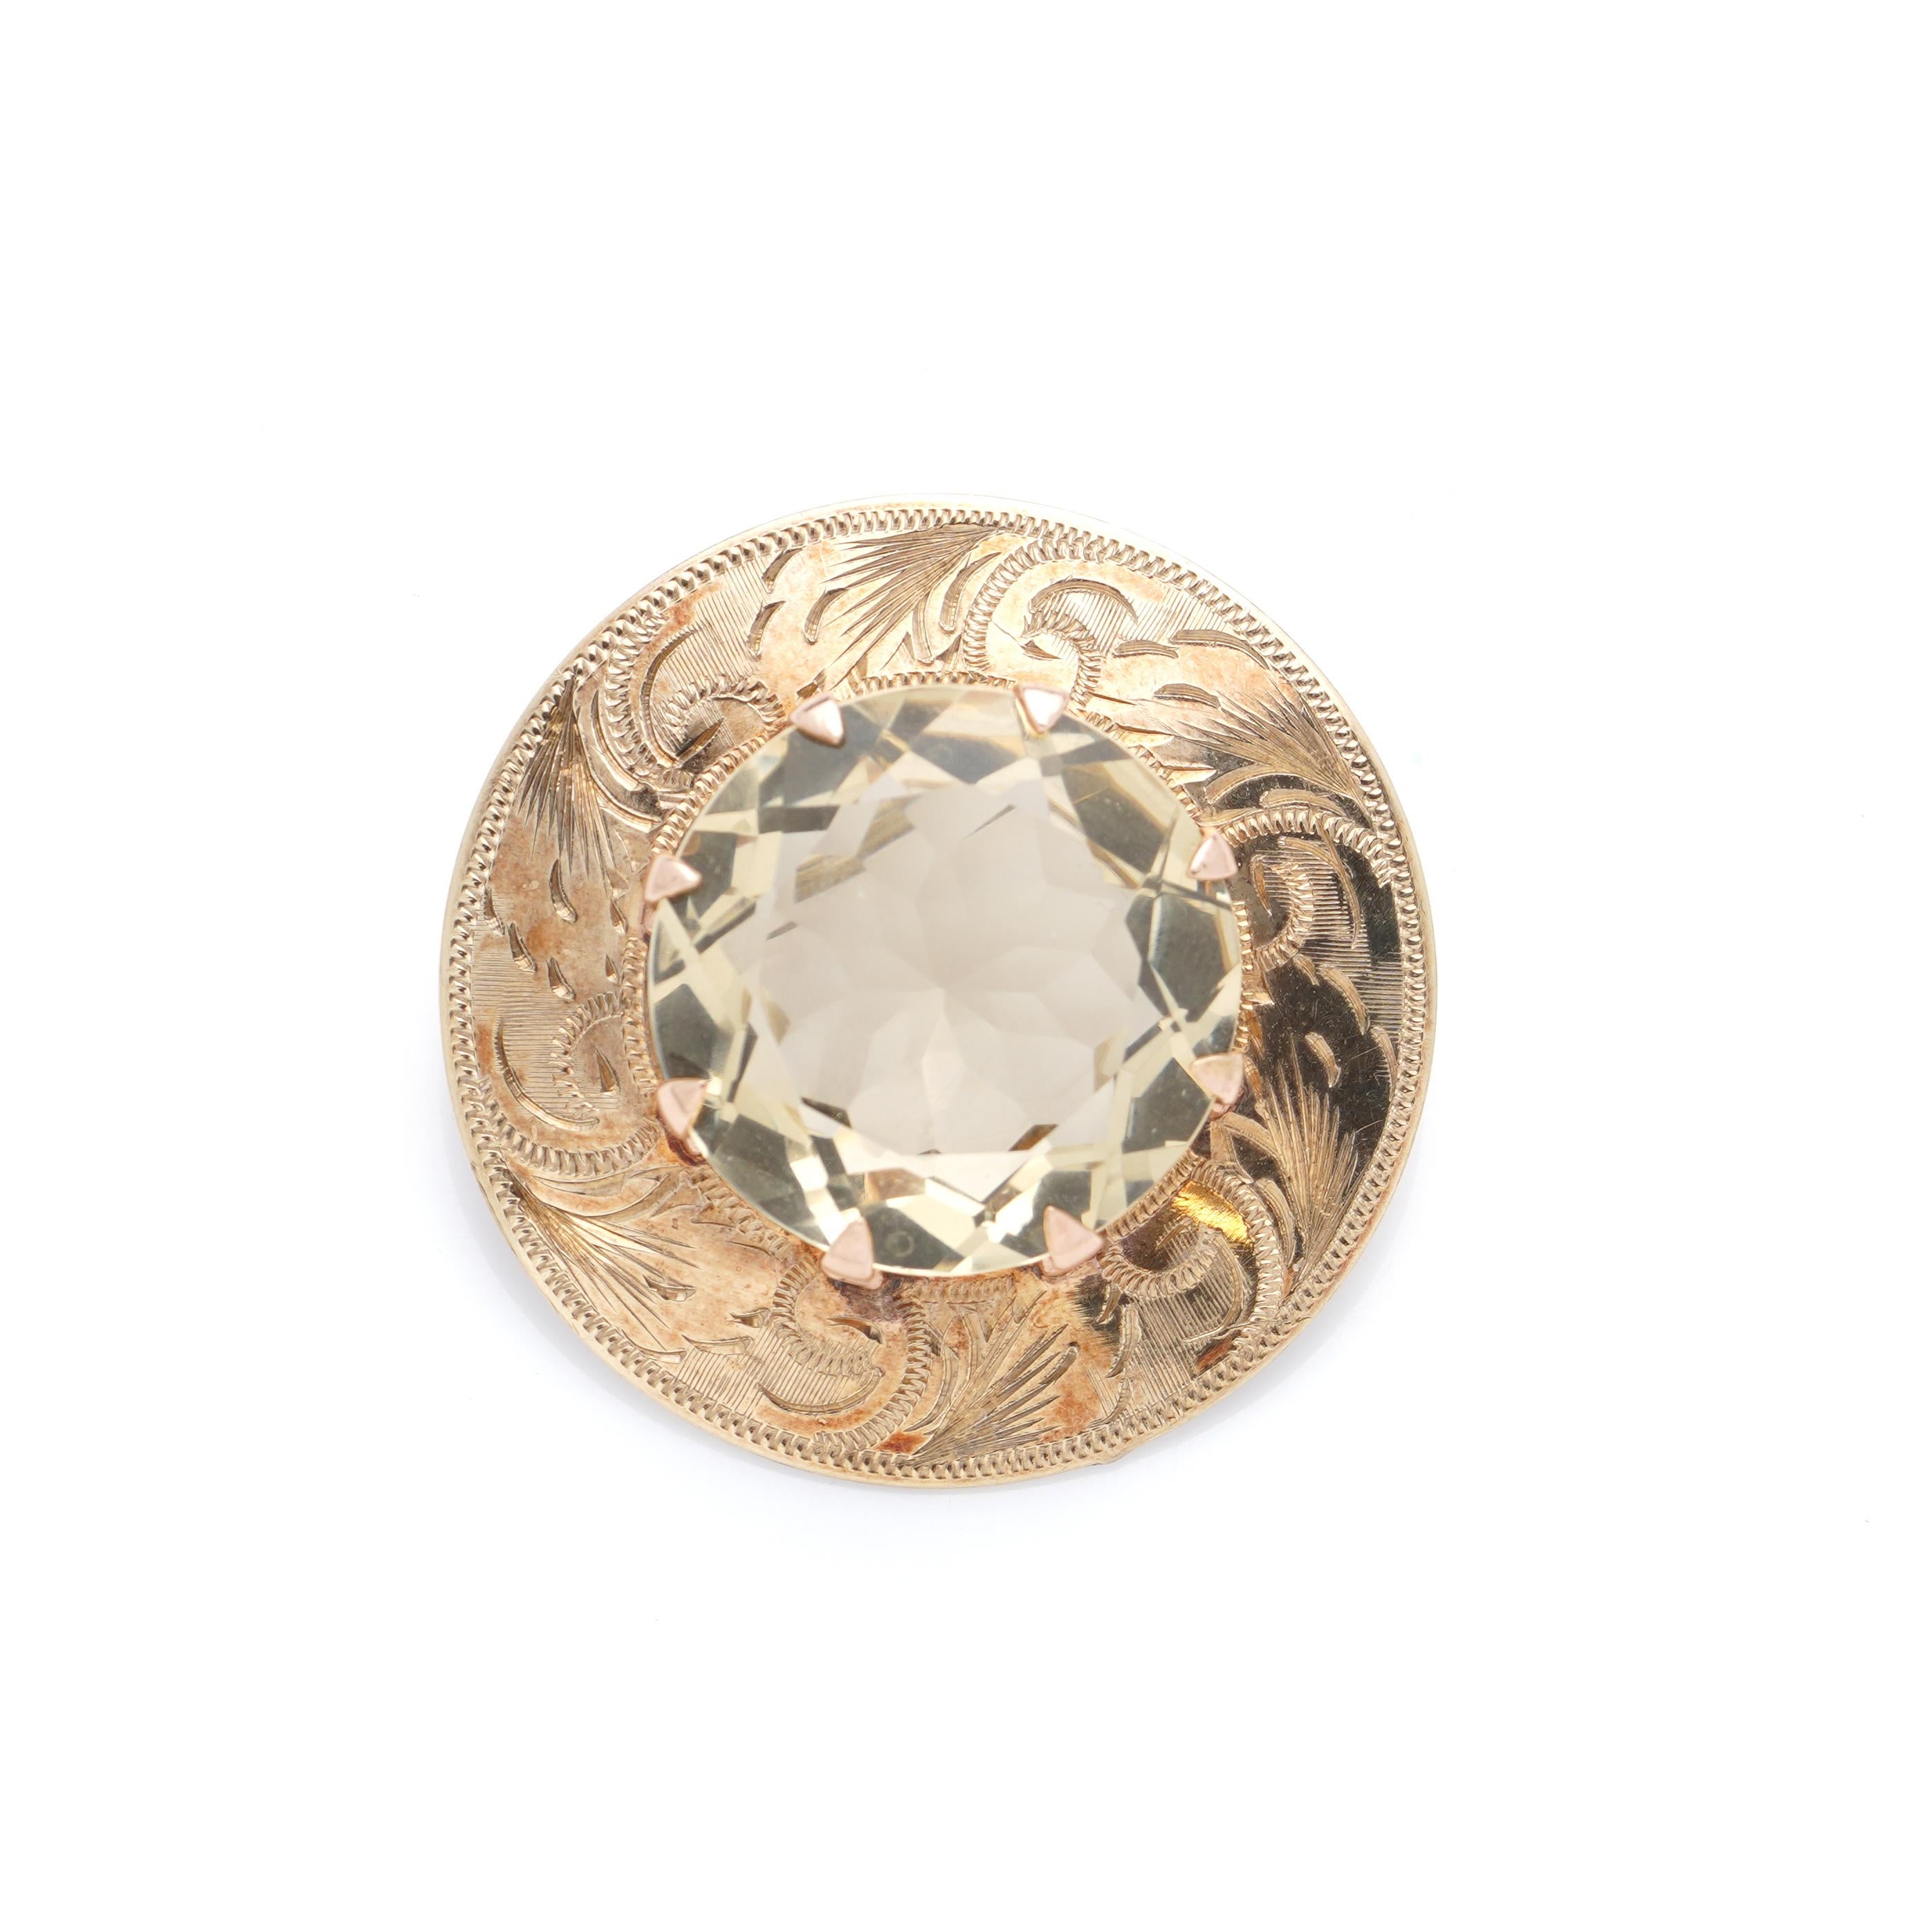 9KT Yellow Gold Scottish Brooch With Zircon Stone
Maker: WBS
Made in Scotland, 1965
Fully Hallmarked 9KT GOLD

Dimensions - 
Diameter x Depth: 3.4 x 1.5 cm
Weight: 10.19 grams

Zircon Stone: 31 Carats Approximately.

Condition: Pre-owned, great